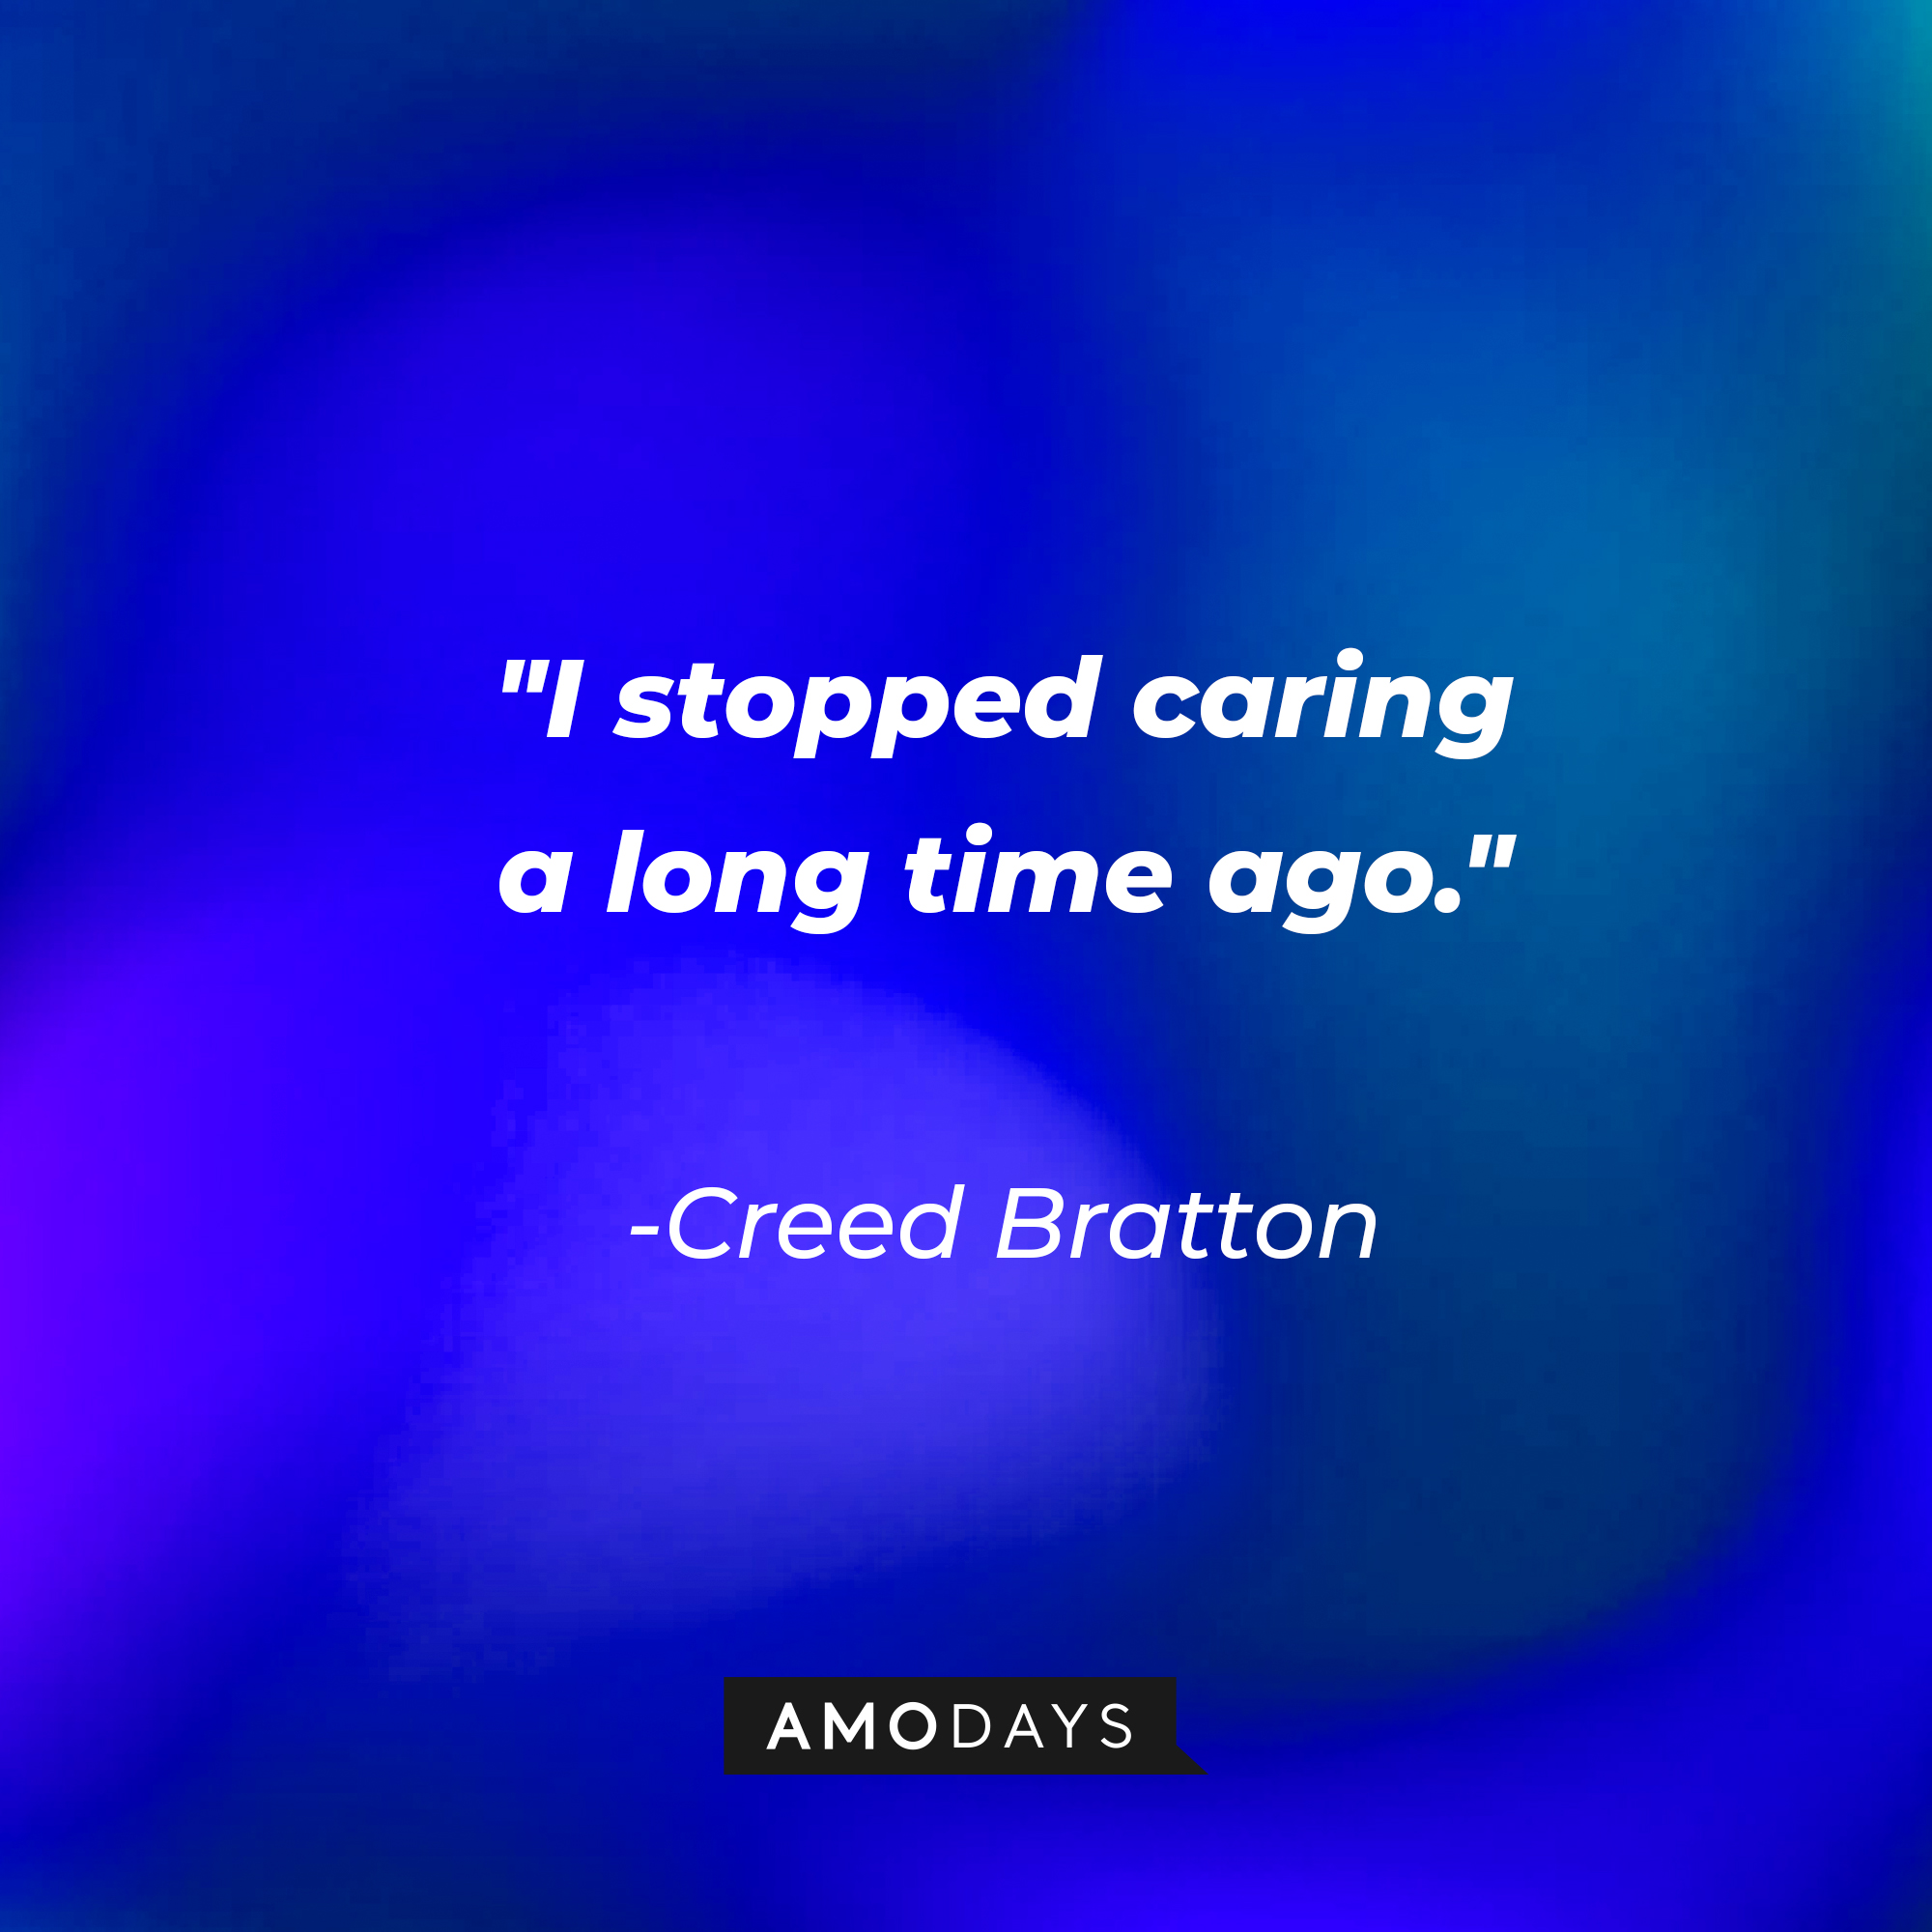 Creed Bratton's quote: "I stopped caring a long time ago." | Source: AmoDays